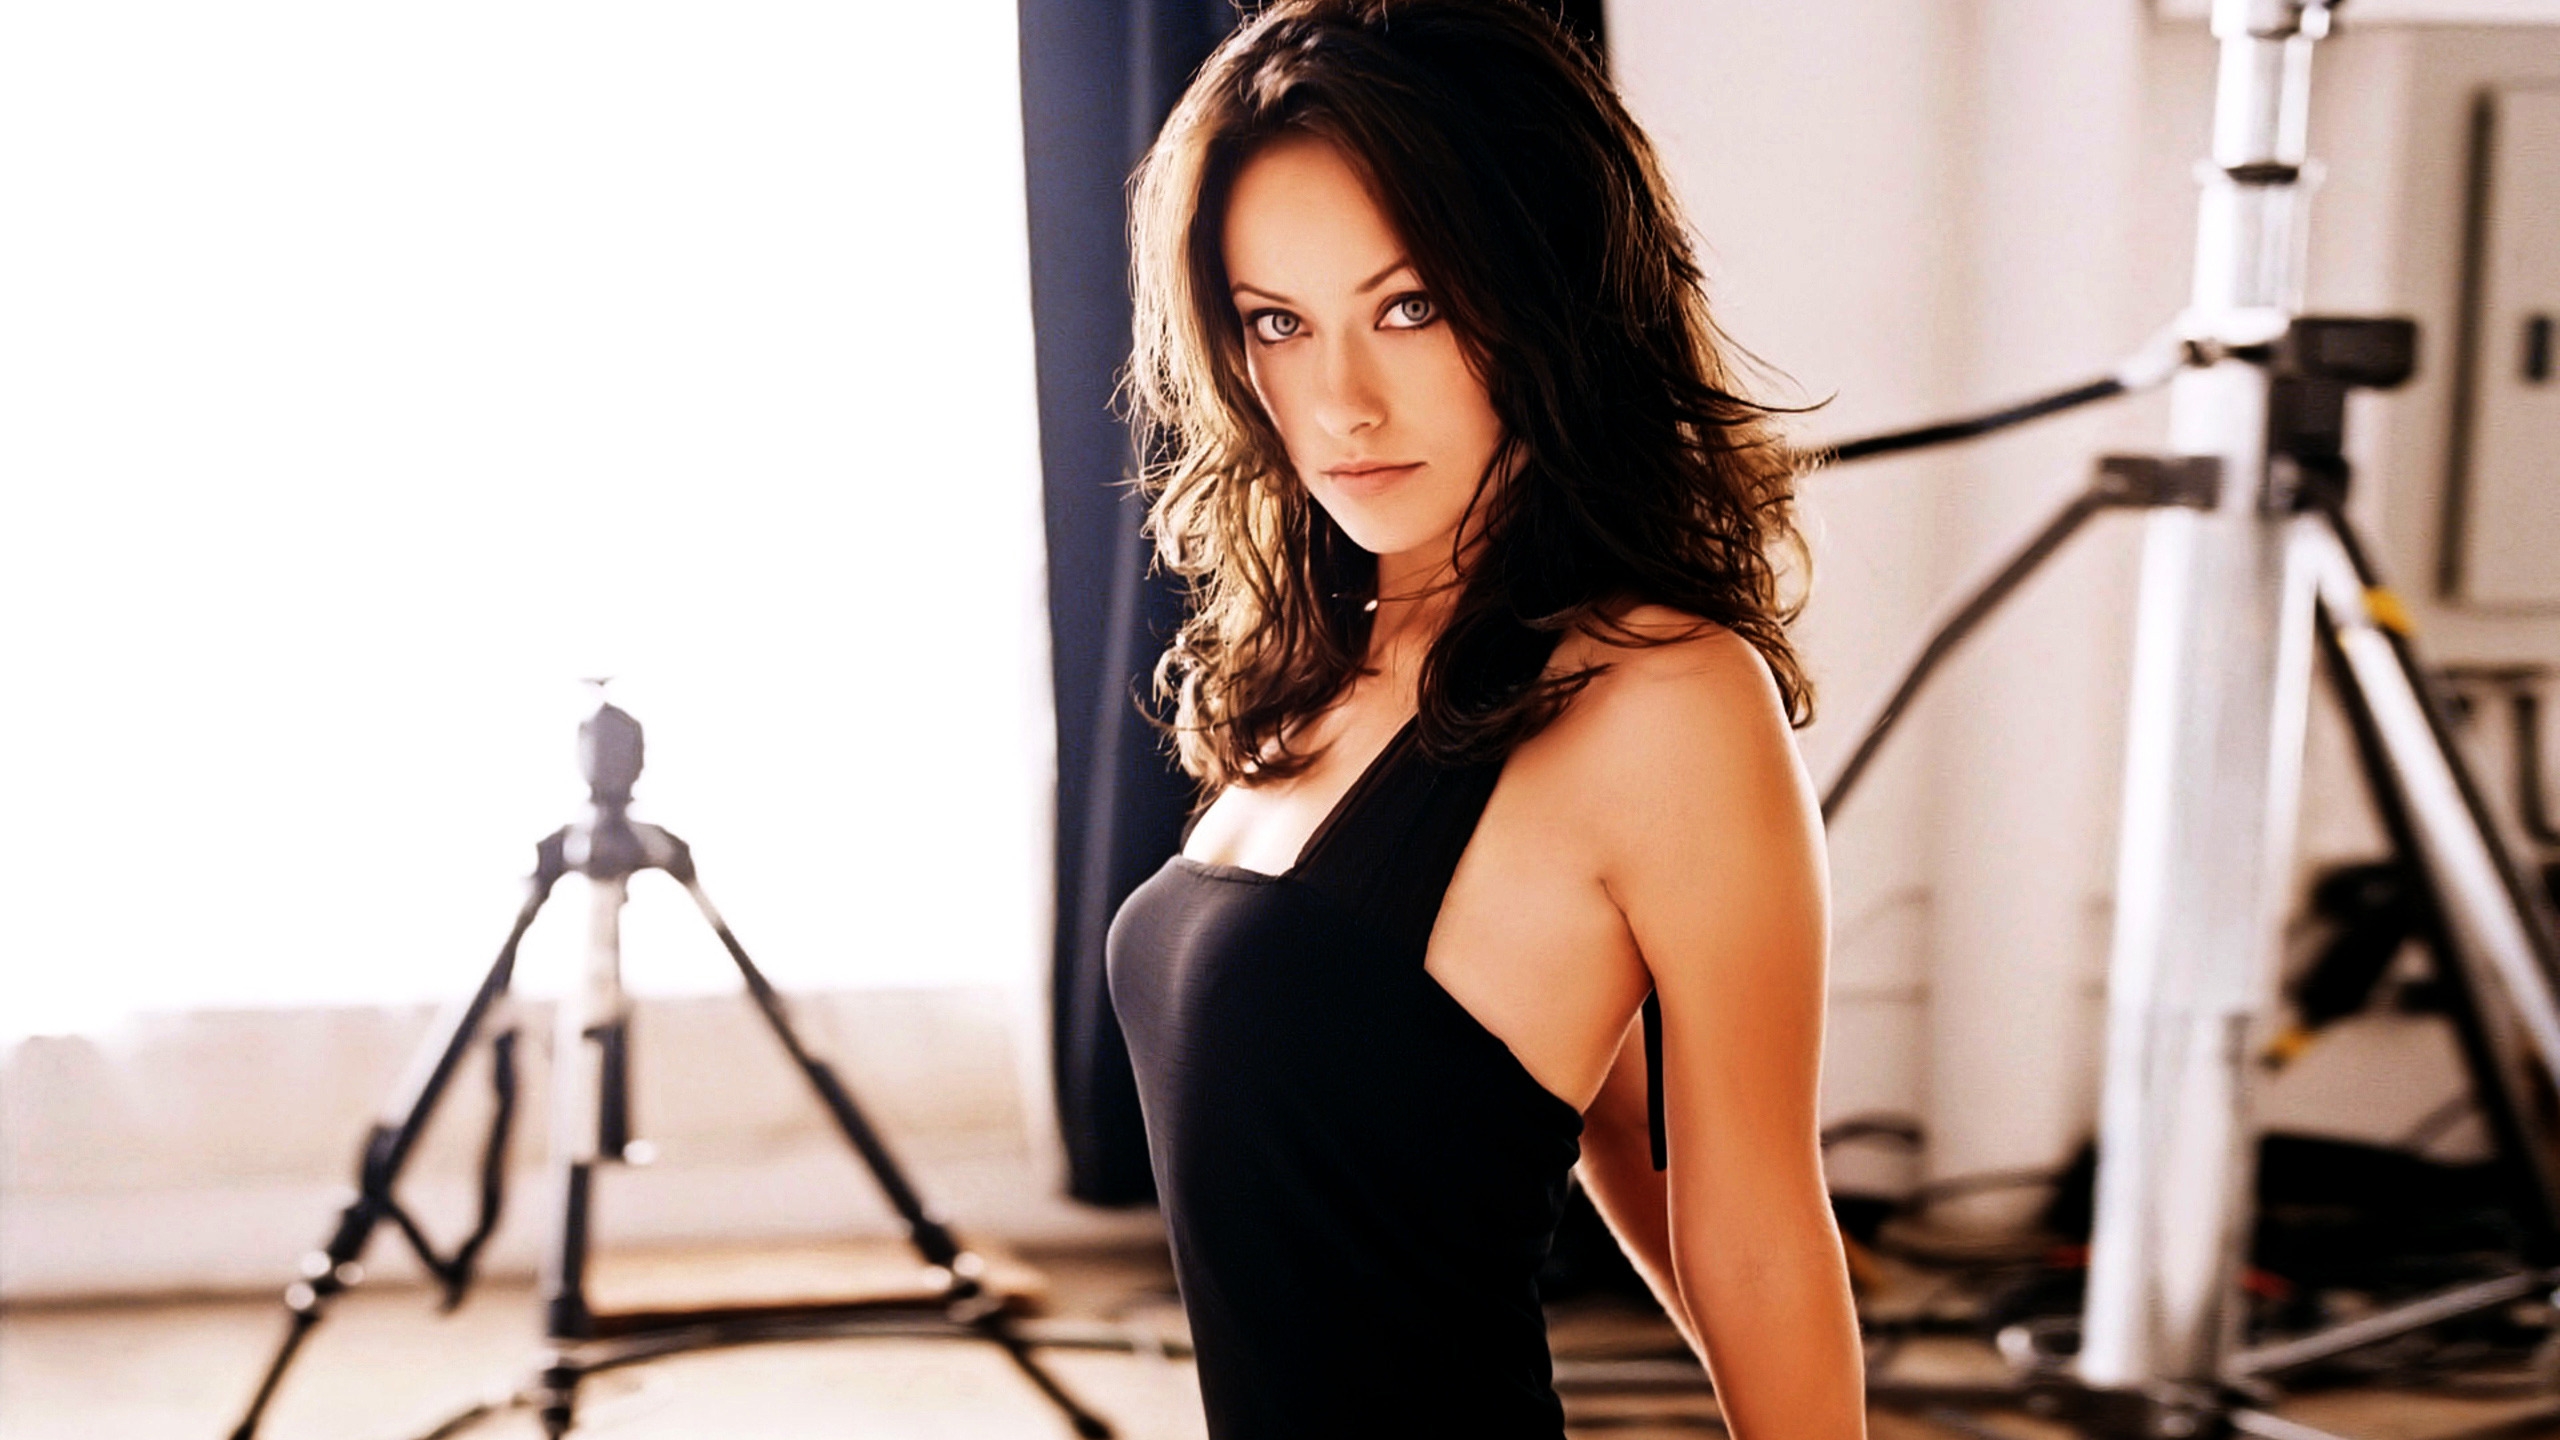 Olivia Wilde Serious Look for 2560x1440 HDTV resolution